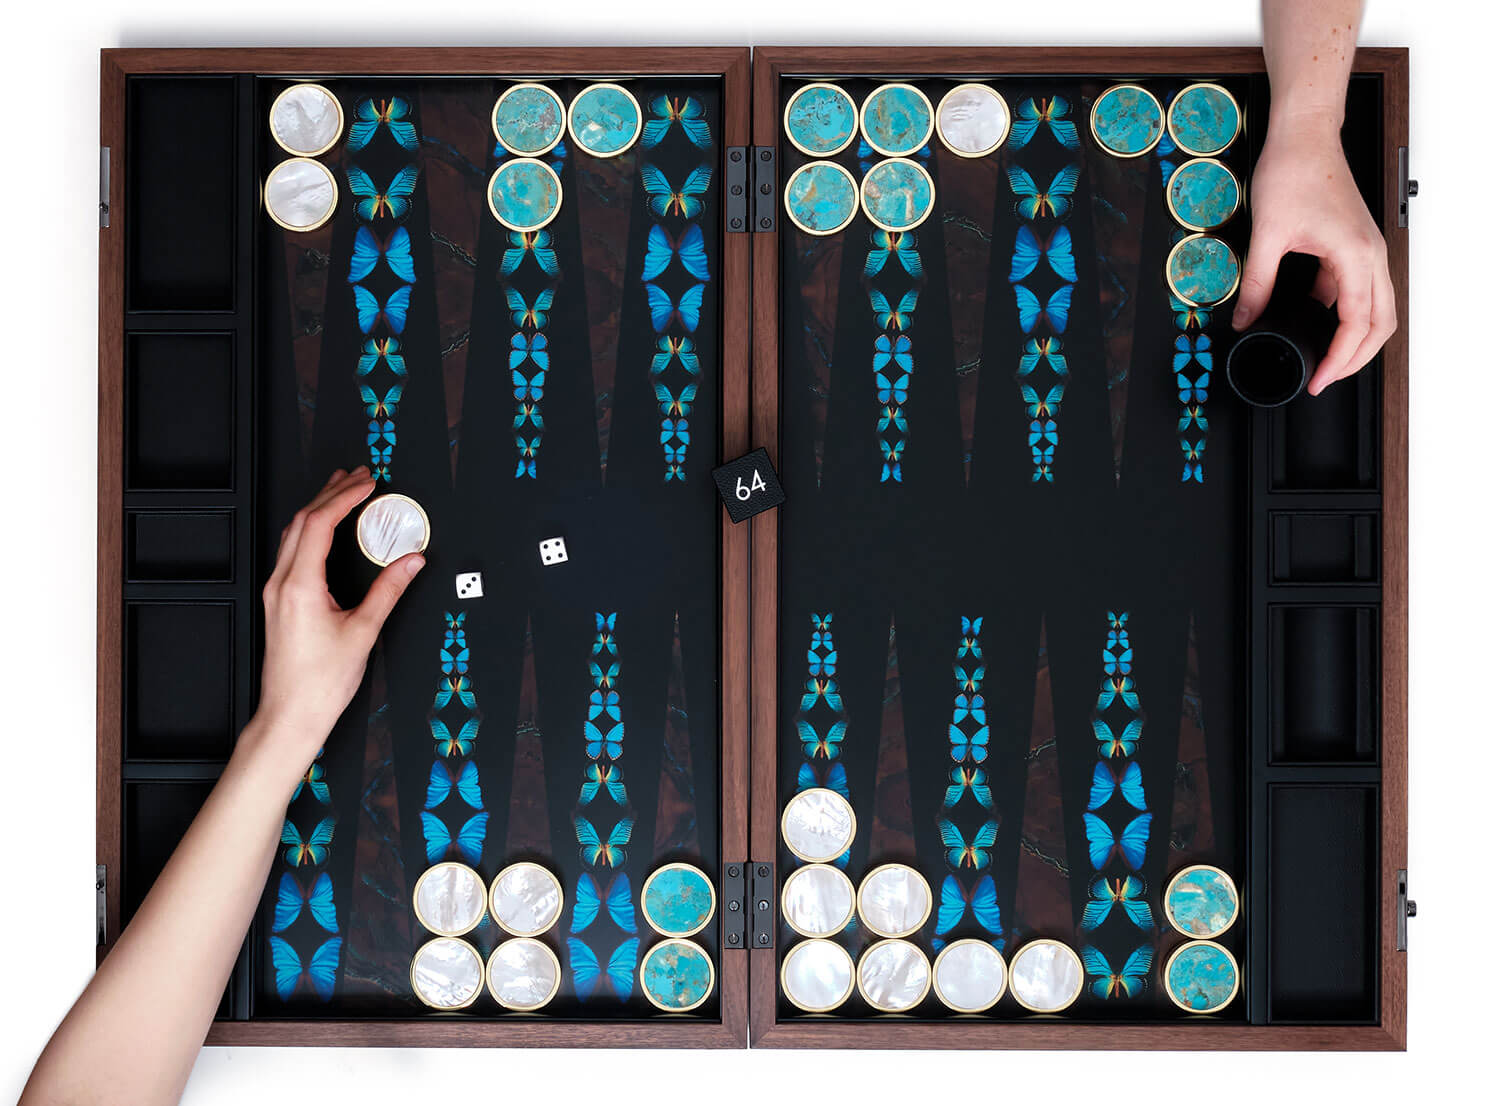 Two people playing a game of Photographic Butterfly backgammon with semi-precious stone playing pieces